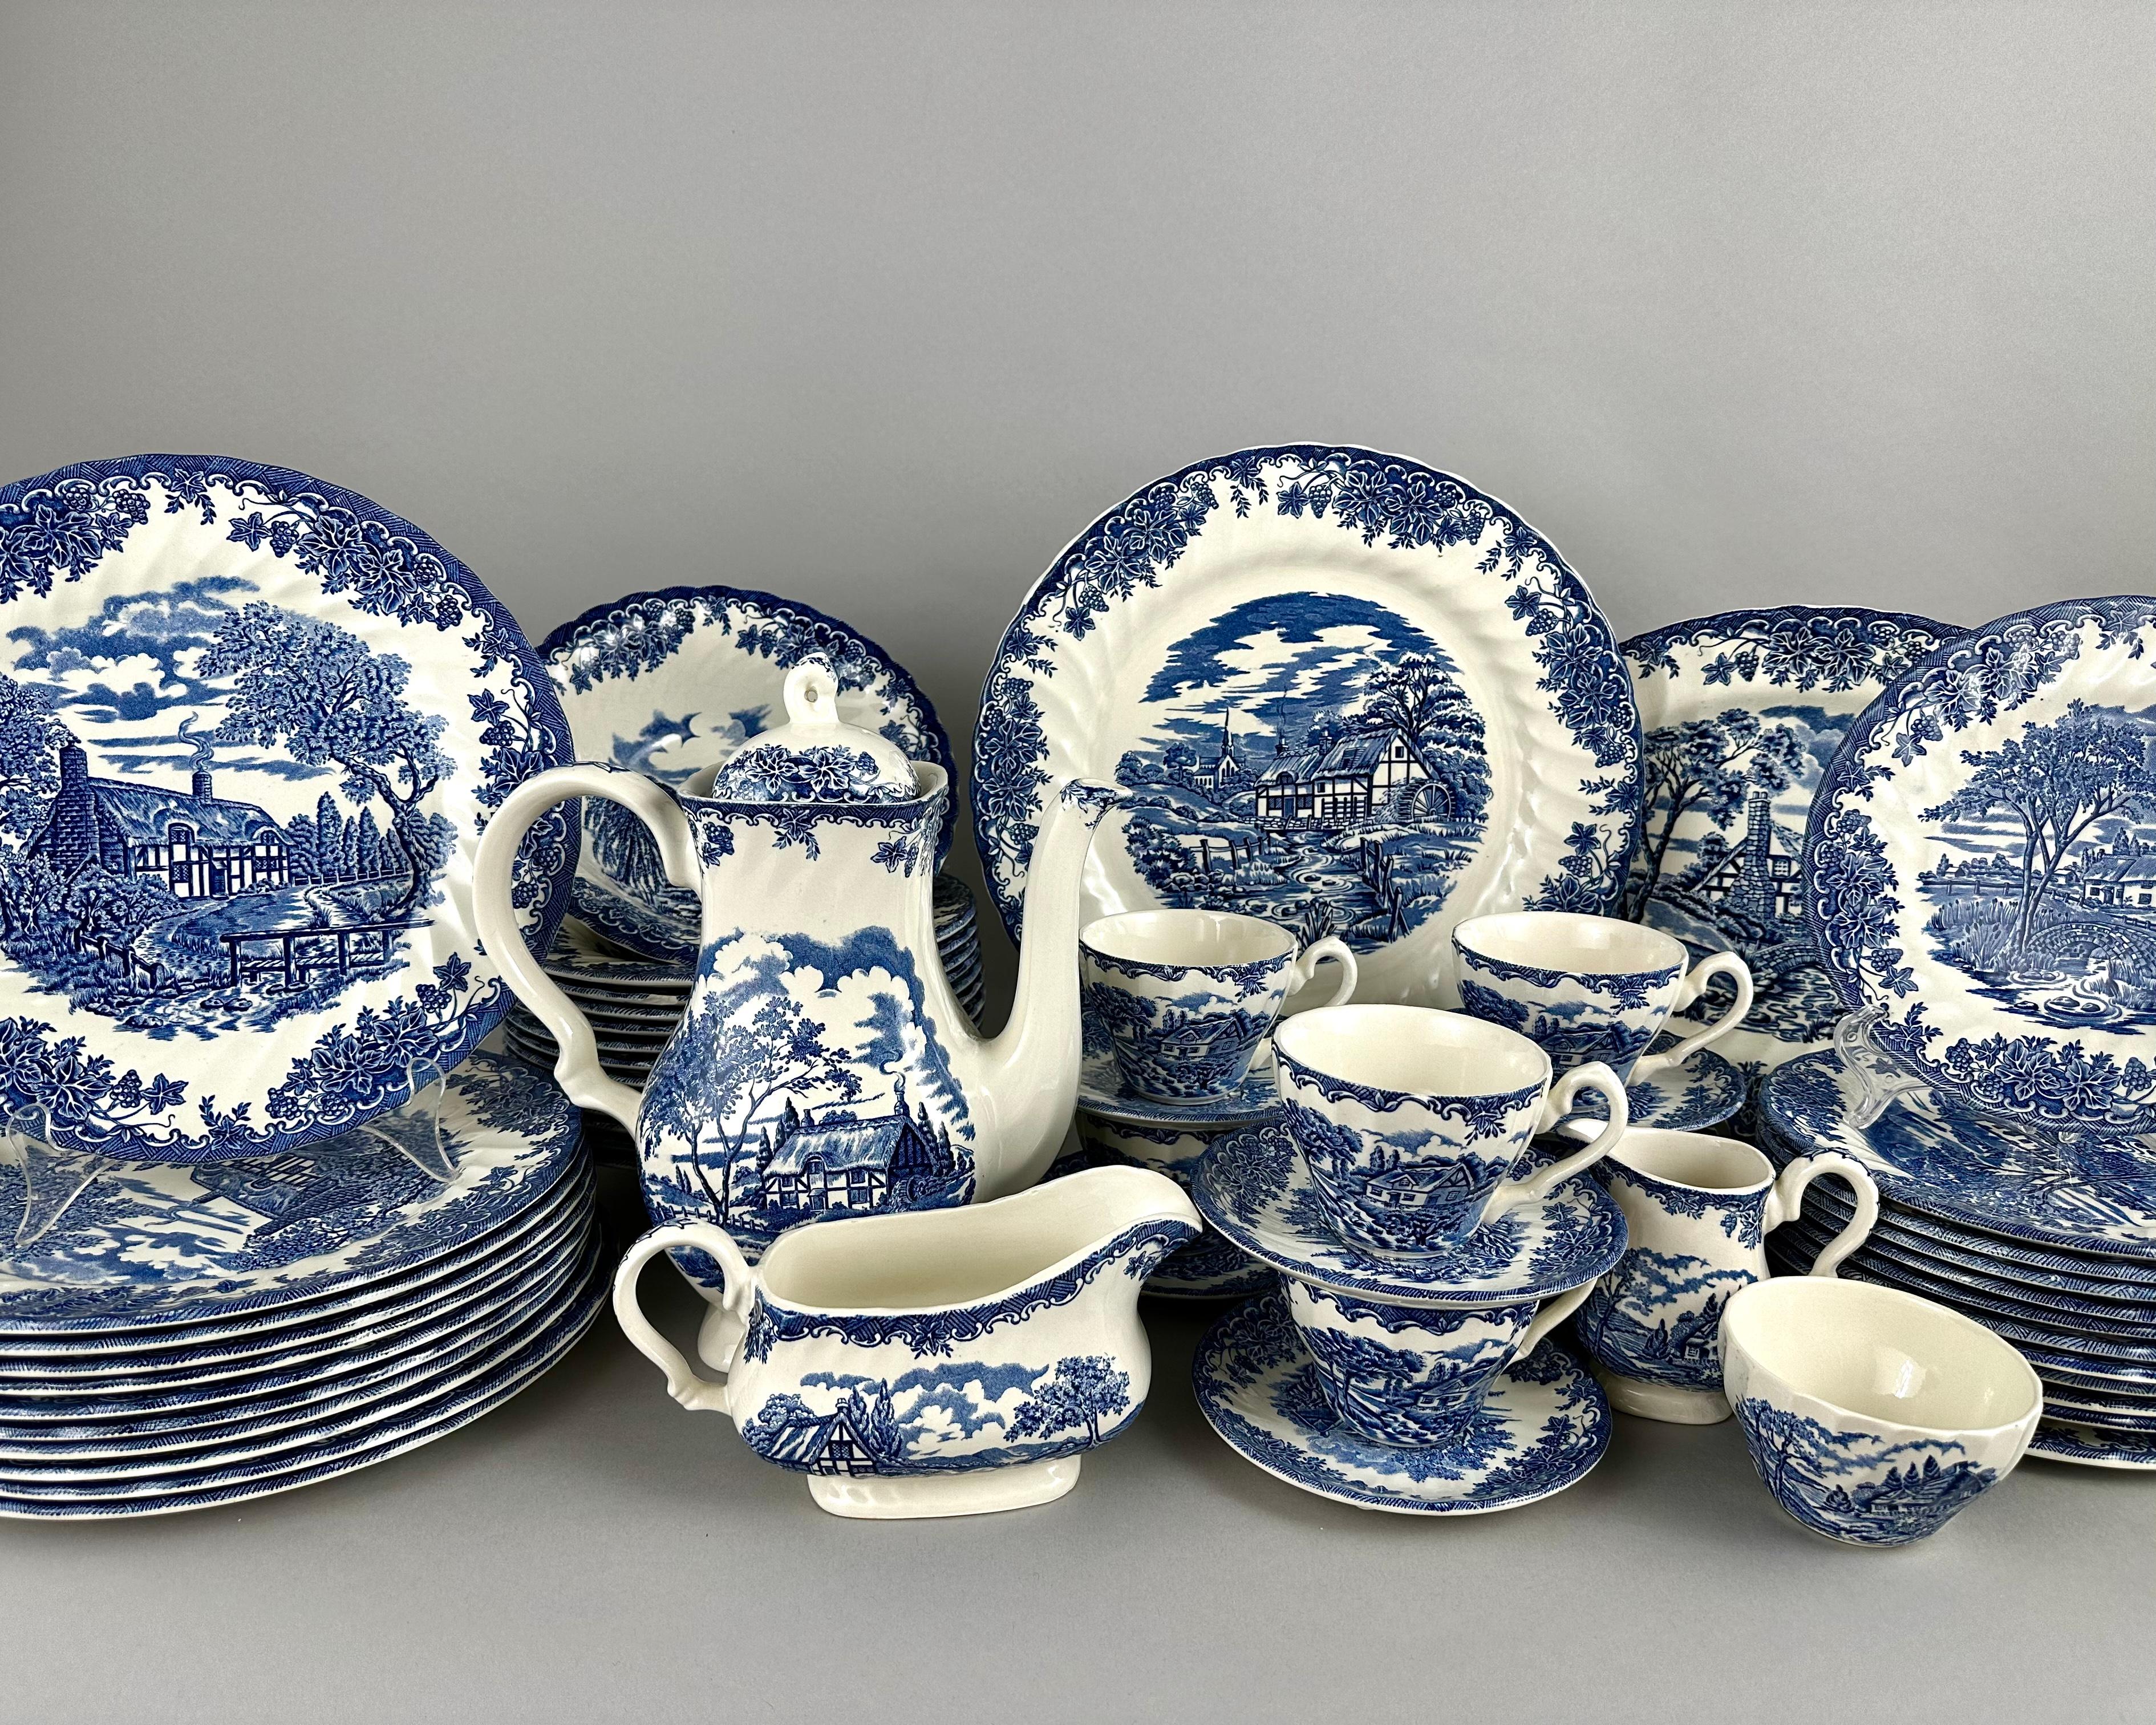 Large vintage English service The Brook of the famous Myotts porcelain factory from Staffordshire.

A very elegant service in blue and white, traditional for Staffordshire dishes.

The items are decorated with rural scenes and each type of plate is